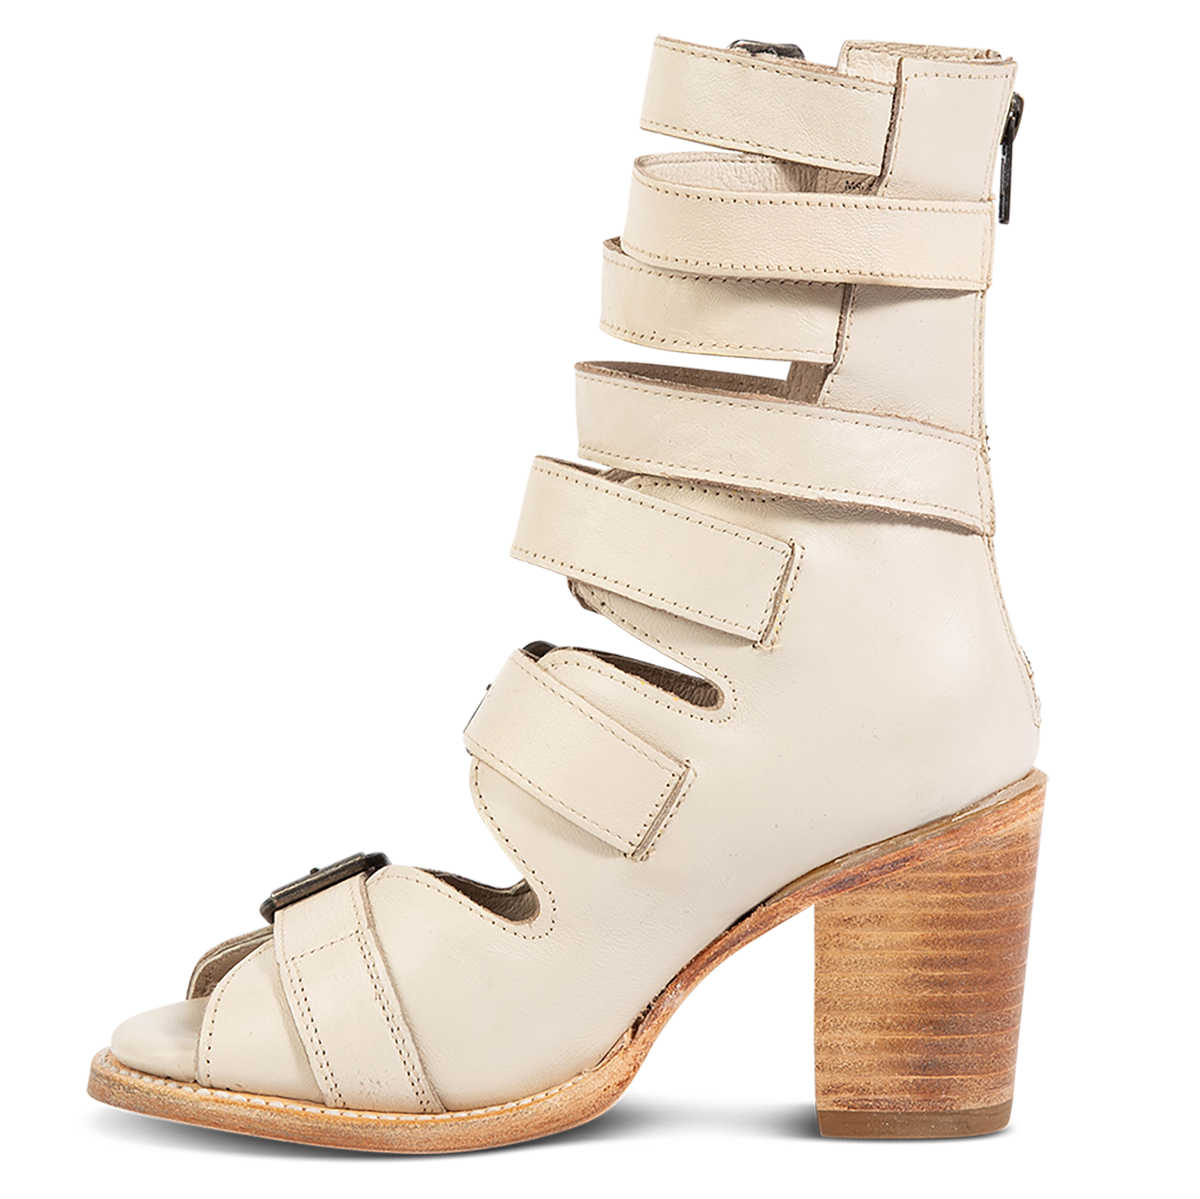 Inside view showing FREEBIRD women's Bond off white sandal with fashion straps and stacked heel